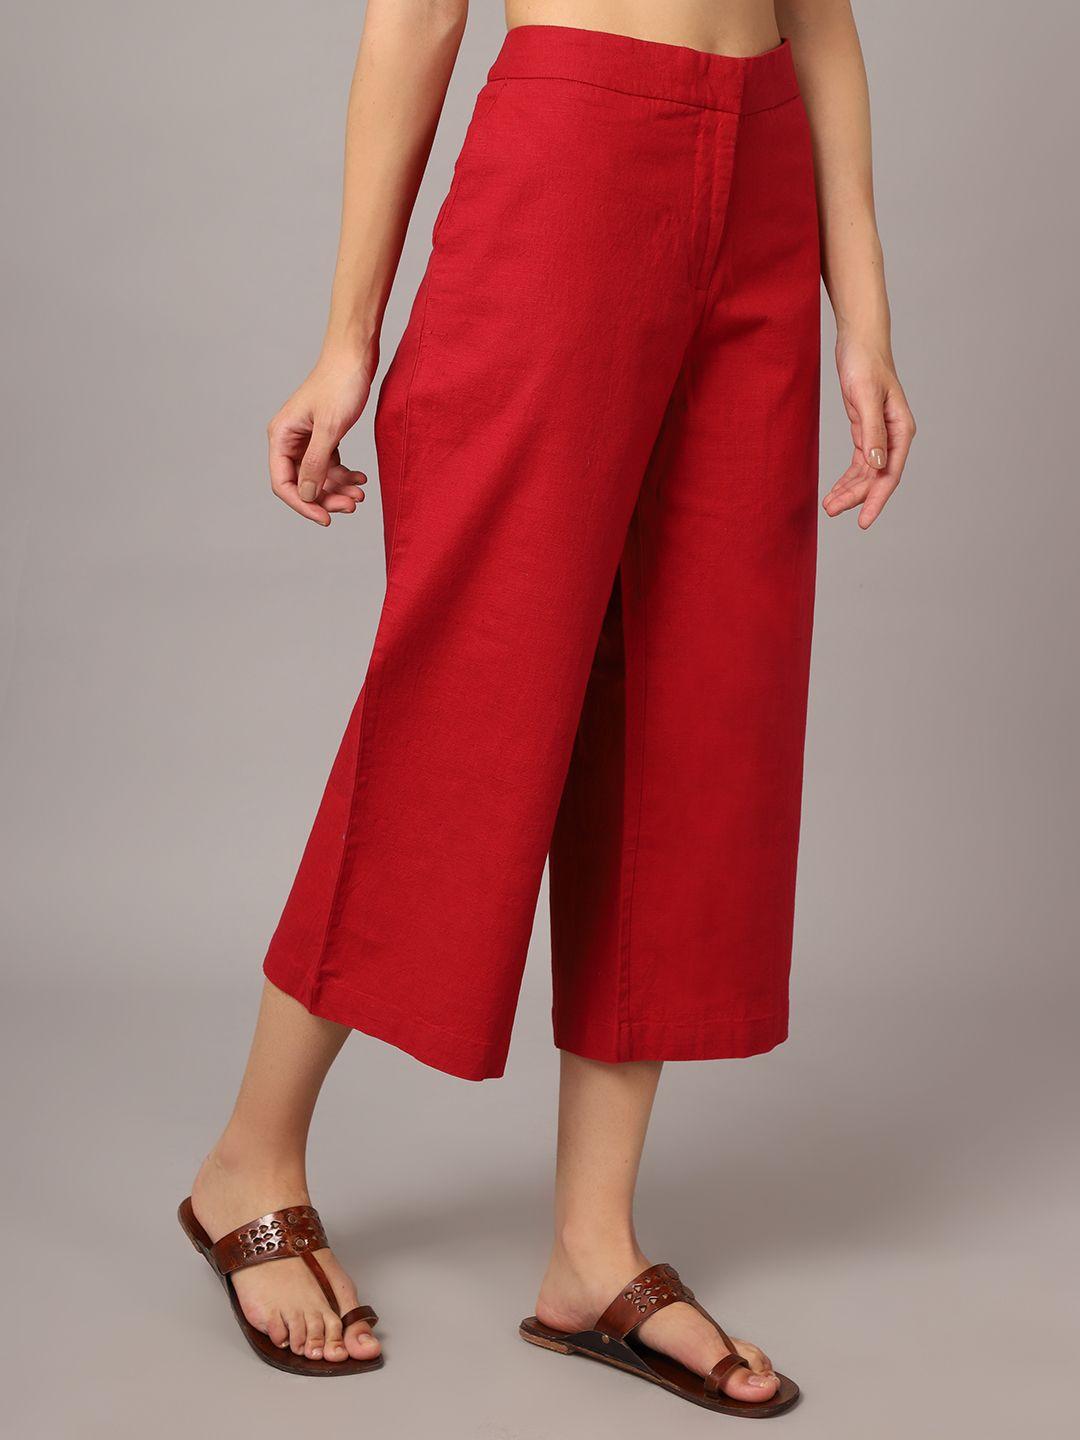 crozo-by-cantabil-women-red-trousers